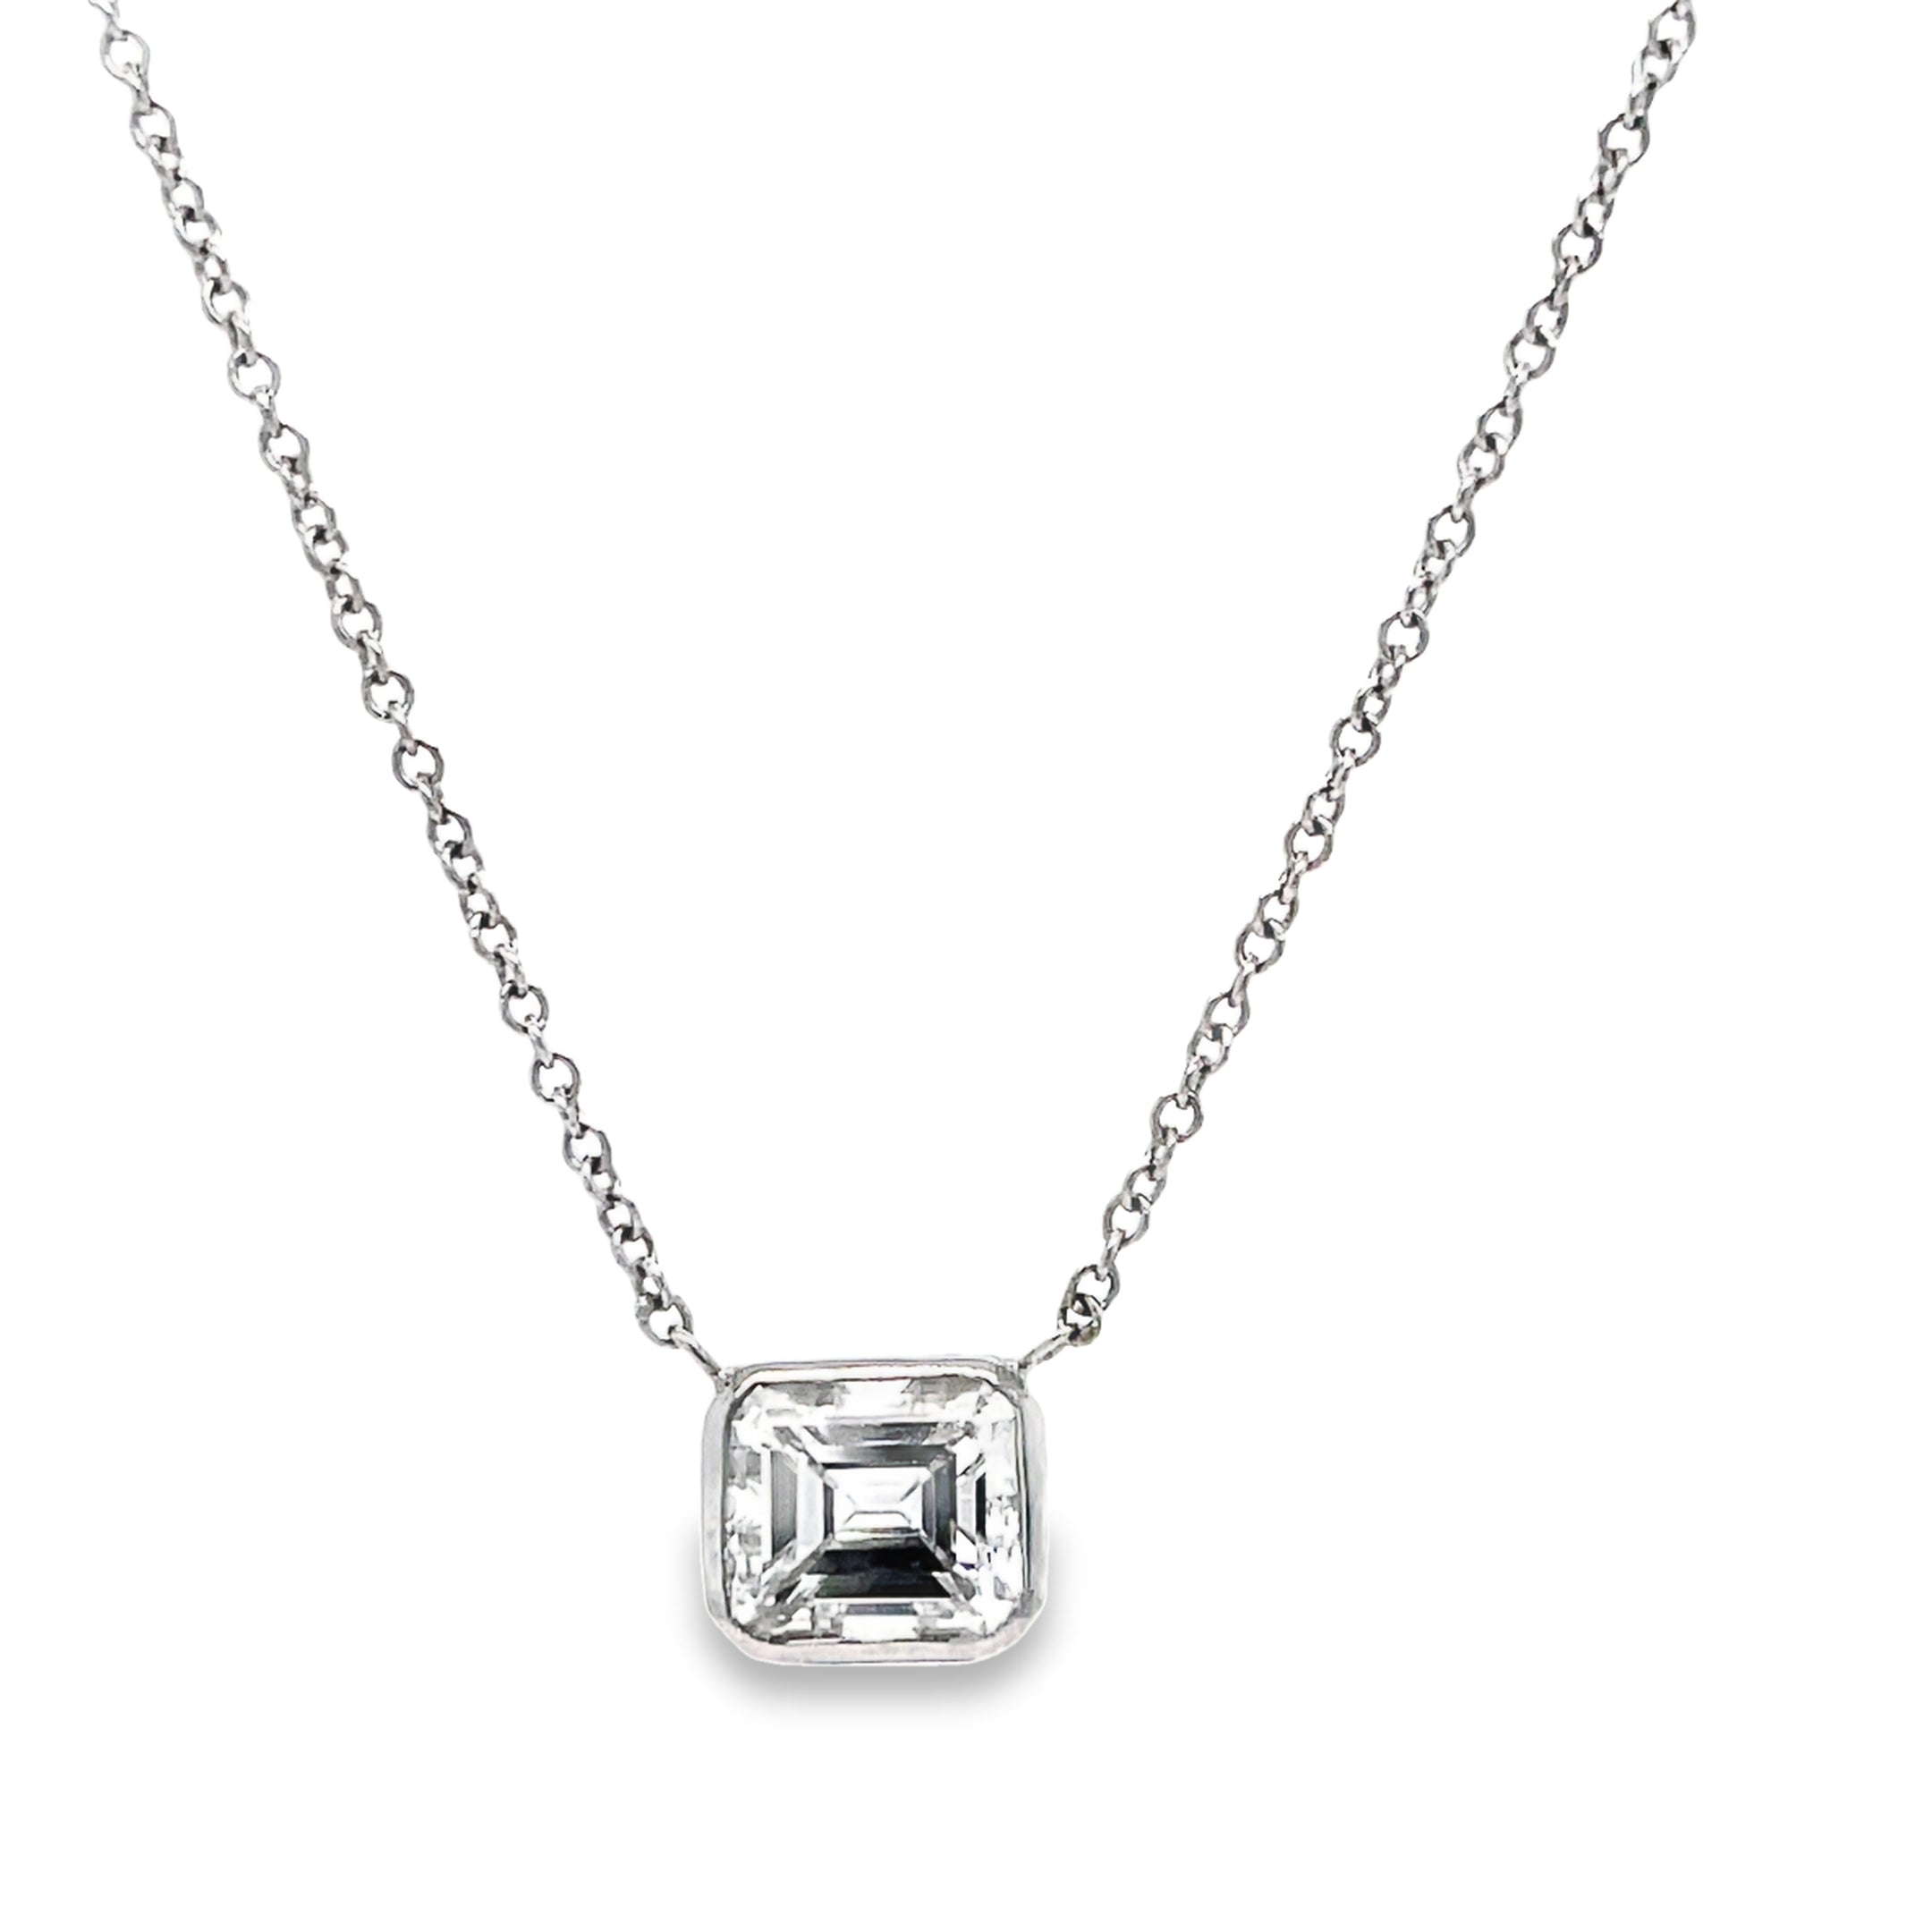 This exquisite pendant necklace features an emerald cut diamond weighing 1.19 carats with a color grade of E and clarity grade of VVS2, set in a 14k white gold pendant. The 18" long chain completes the elegant look. Enhance any outfit with this stunning piece of timeless jewelry.